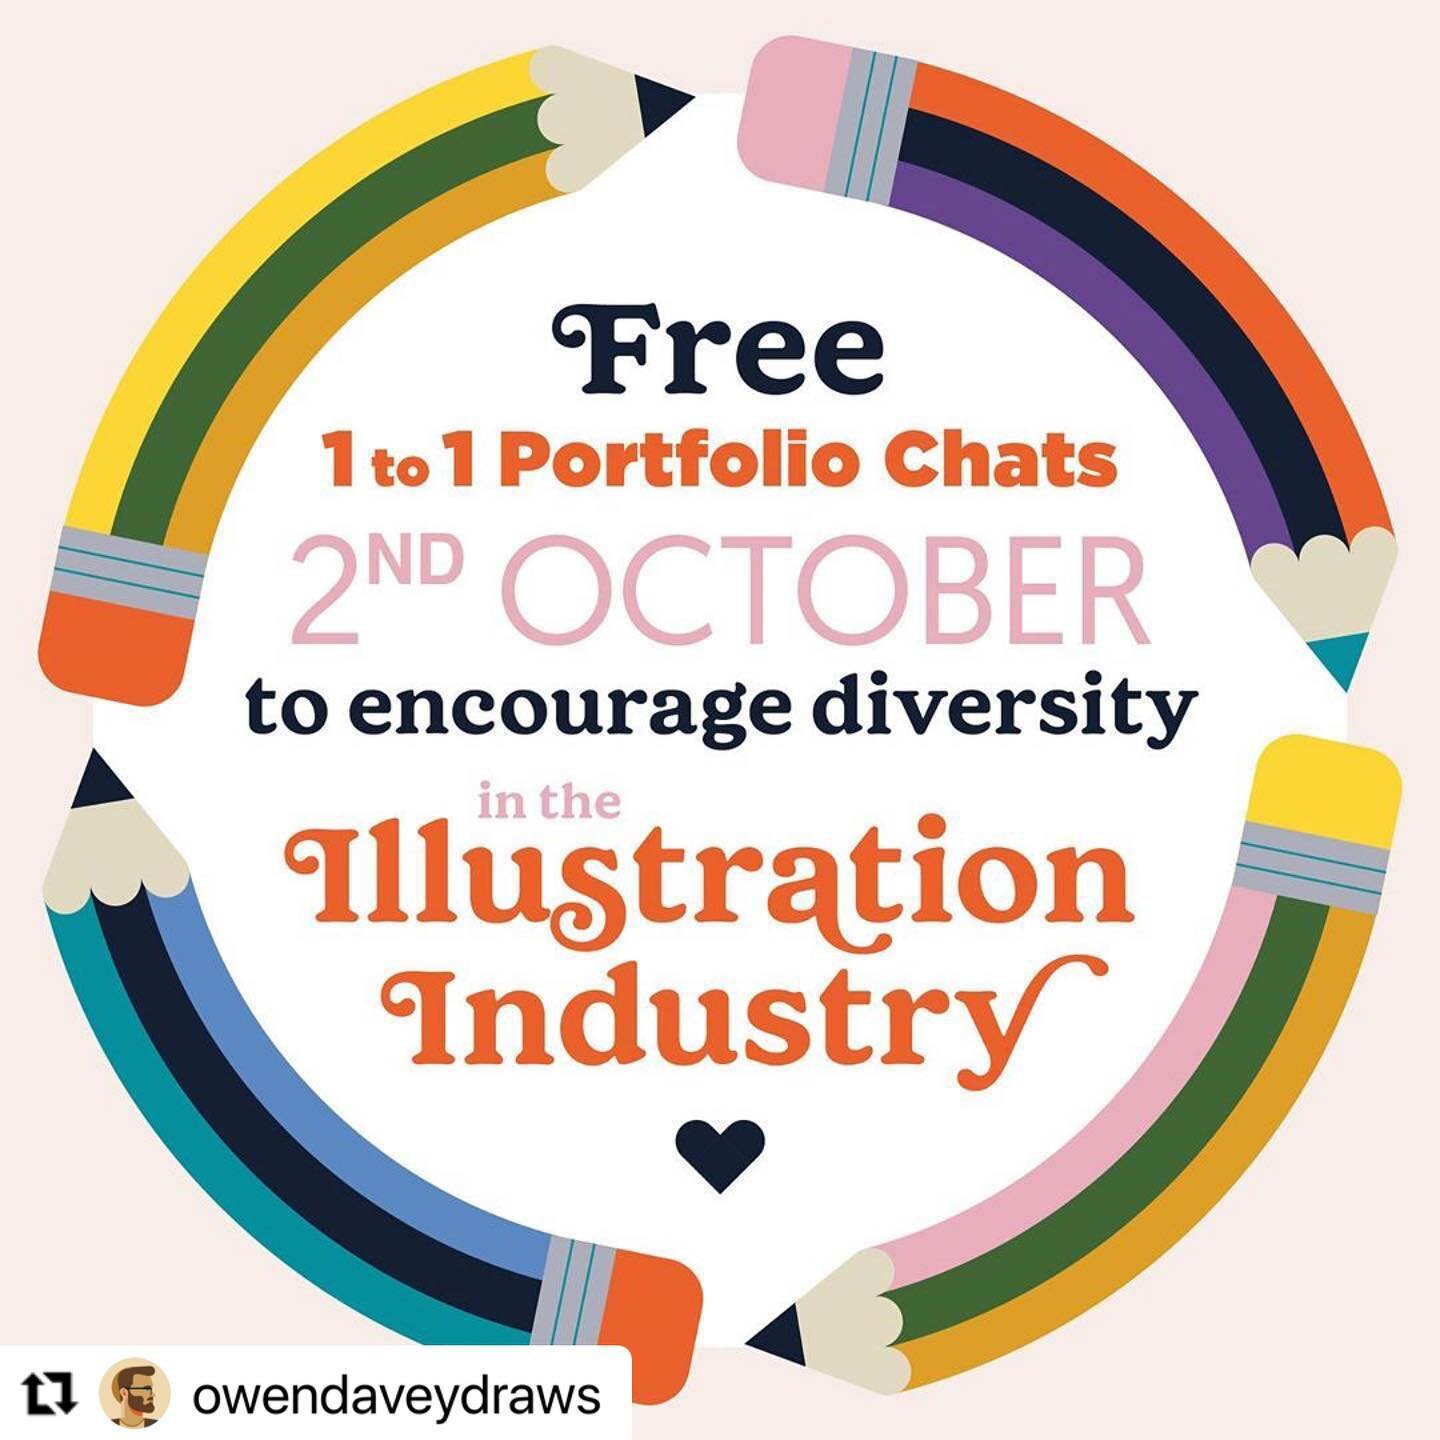 When we hear of new opportunities, we like to share them with you, in the hope that it will open up new platforms to you. Well done to @owendaveydraws and his team for supporting #diverseillustrators. 

#Repost @owendaveydraws with @make_repost 
・・・
